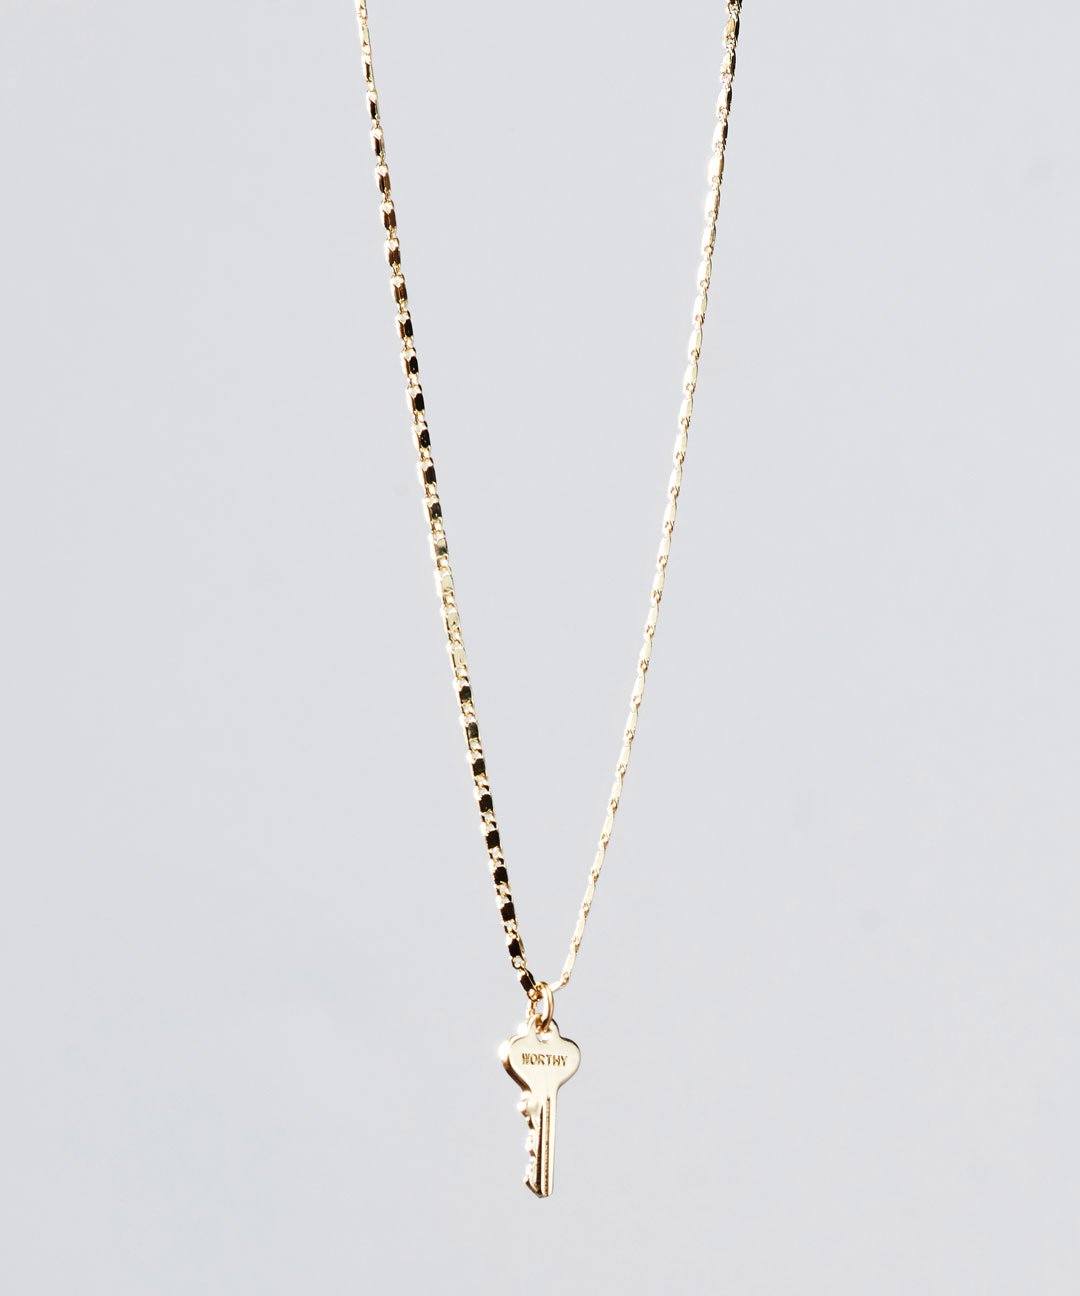 Gold Petite Key Necklace Necklaces The Giving Keys WORTHY GOLD